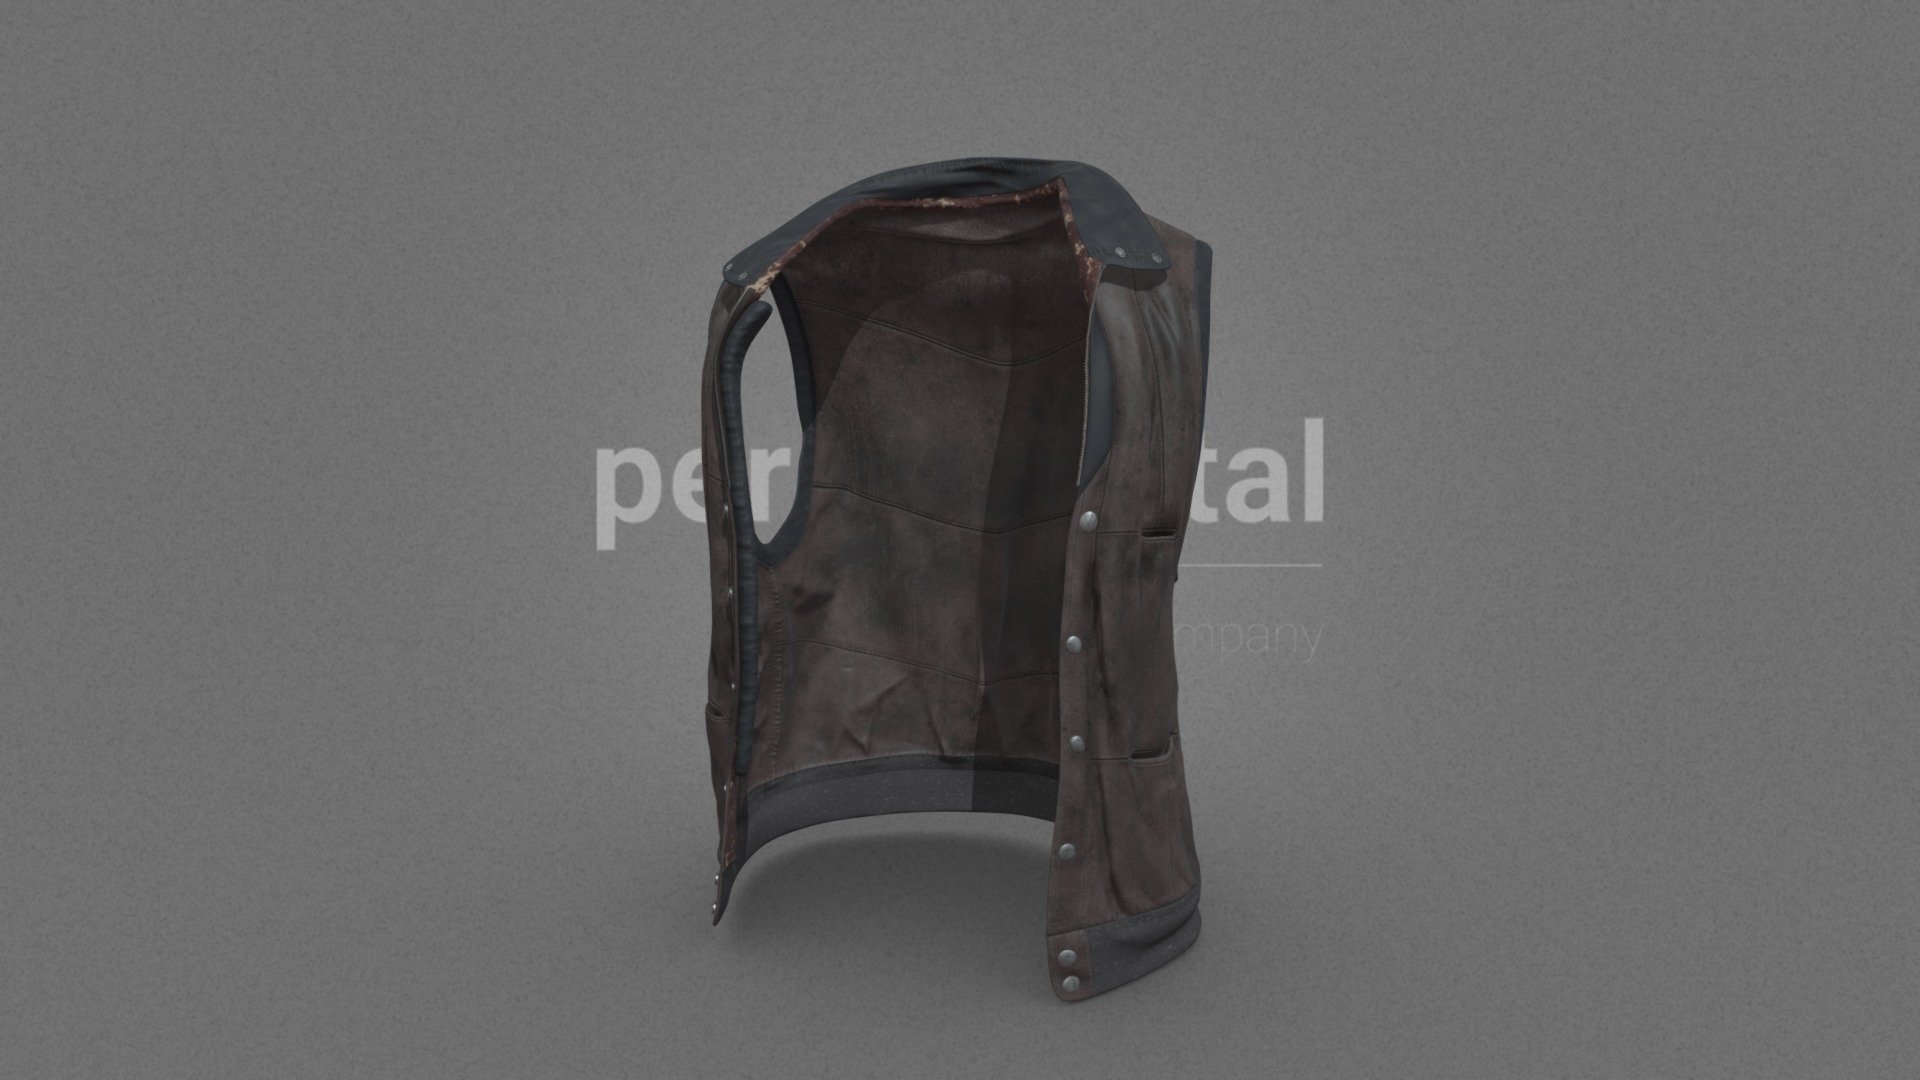 Our Wasteland Garments collection consists of several garments, which you can use in your audiovisual creations, extracted and modeled from our catalog of photogrammetry pieces.

They are optimized for use in 3D scenes of high polygonalization and optimized for rendering. We do not include characters, but they are positioned for you to include and adjust your own character. They have a model LOW (_LODRIG) inside the Blender file (included in the AdditionalFiles), which you can use for vertex weighting or cloth simulation and thus, make the transfer of vertices or property masks from the LOW to the HIGH** model.

We have included the texture maps in high resolution, as well as the Displacement maps, so you can make extreme point of view with your 3D cameras, as well as the Blender file so you can edit any aspect of the set.

Enjoy it.

Web: https://peris.digital/ - Wasteland Garments Series - Model 05 Vest - Buy Royalty Free 3D model by Peris Digital (@perisdigital) 3d model